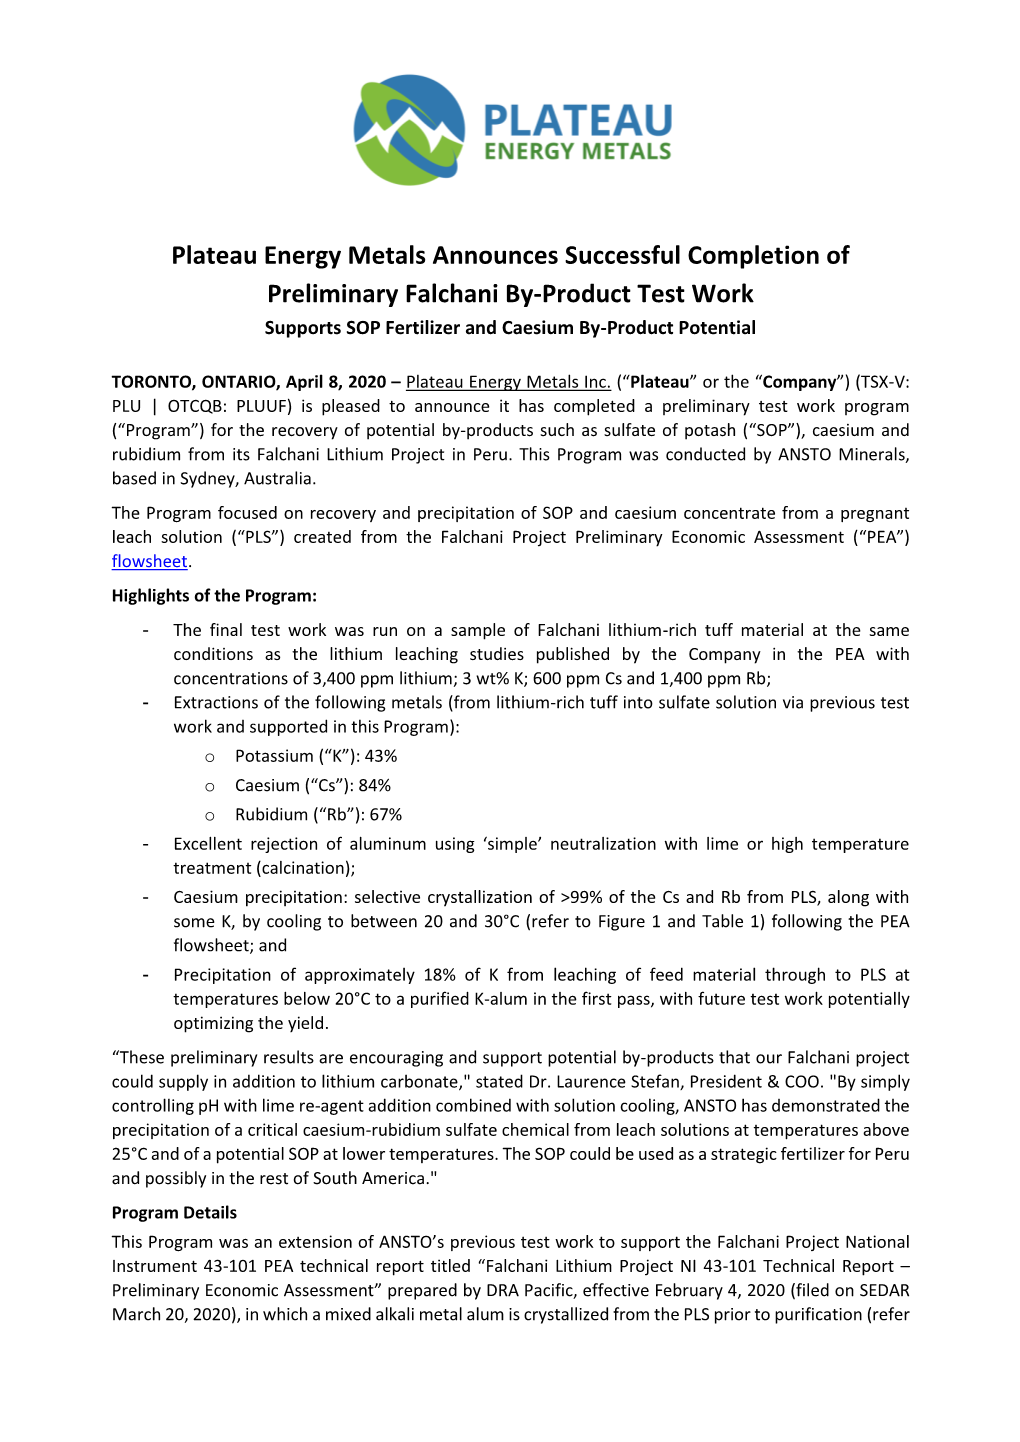 Plateau Energy Metals Announces Successful Completion of Preliminary Falchani By-Product Test Work Supports SOP Fertilizer and Caesium By-Product Potential